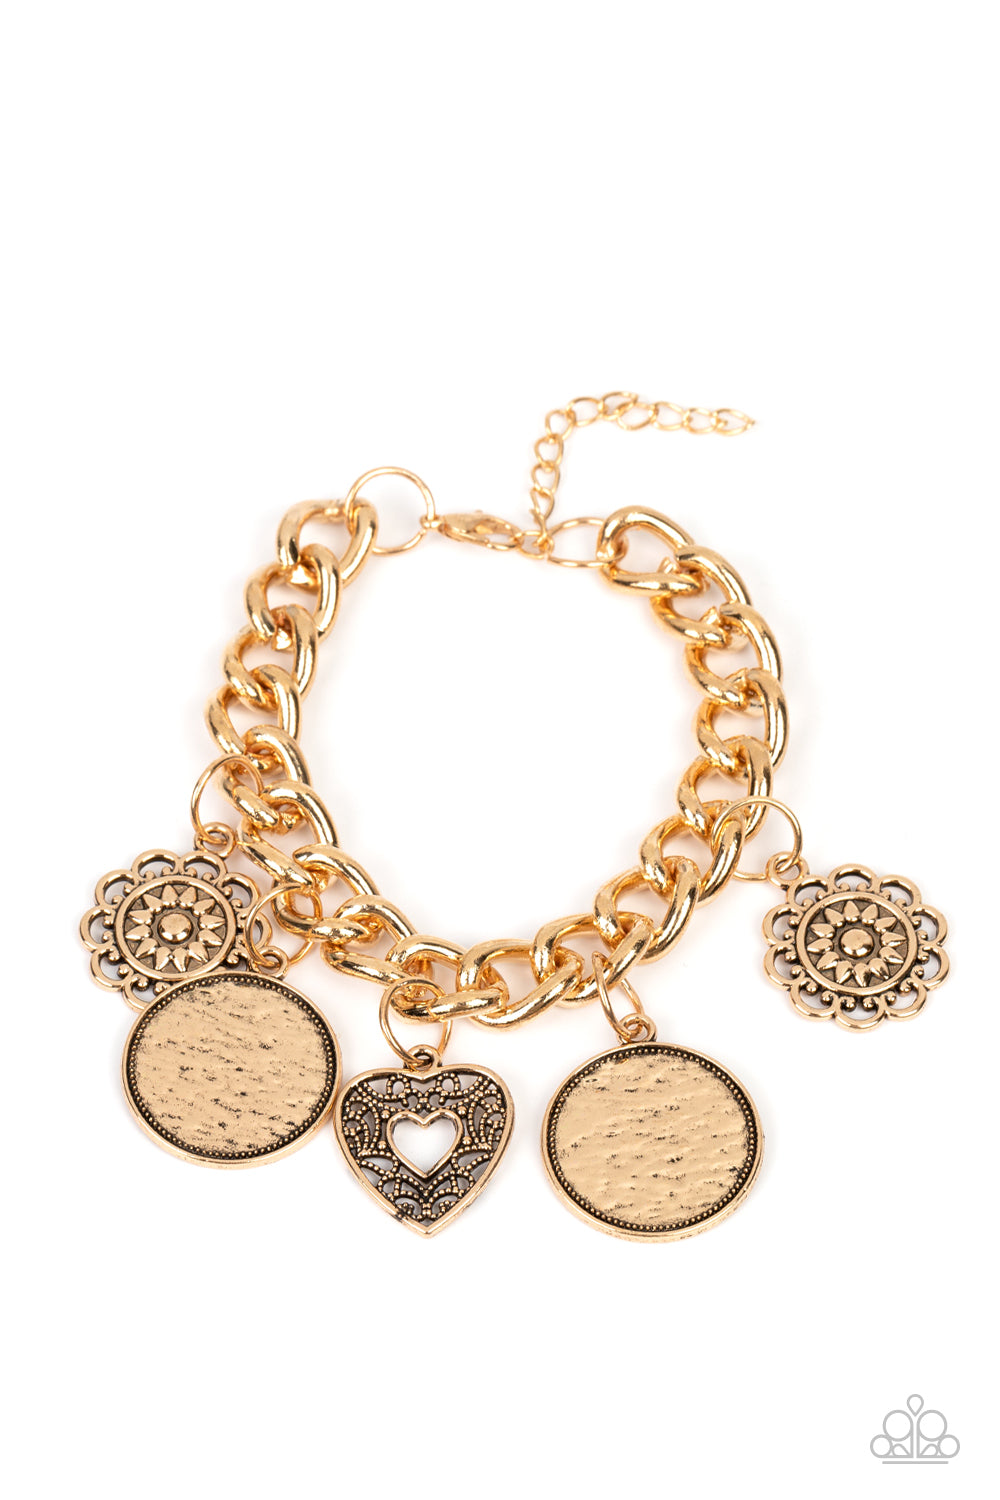 Complete CHARM-ony - Gold